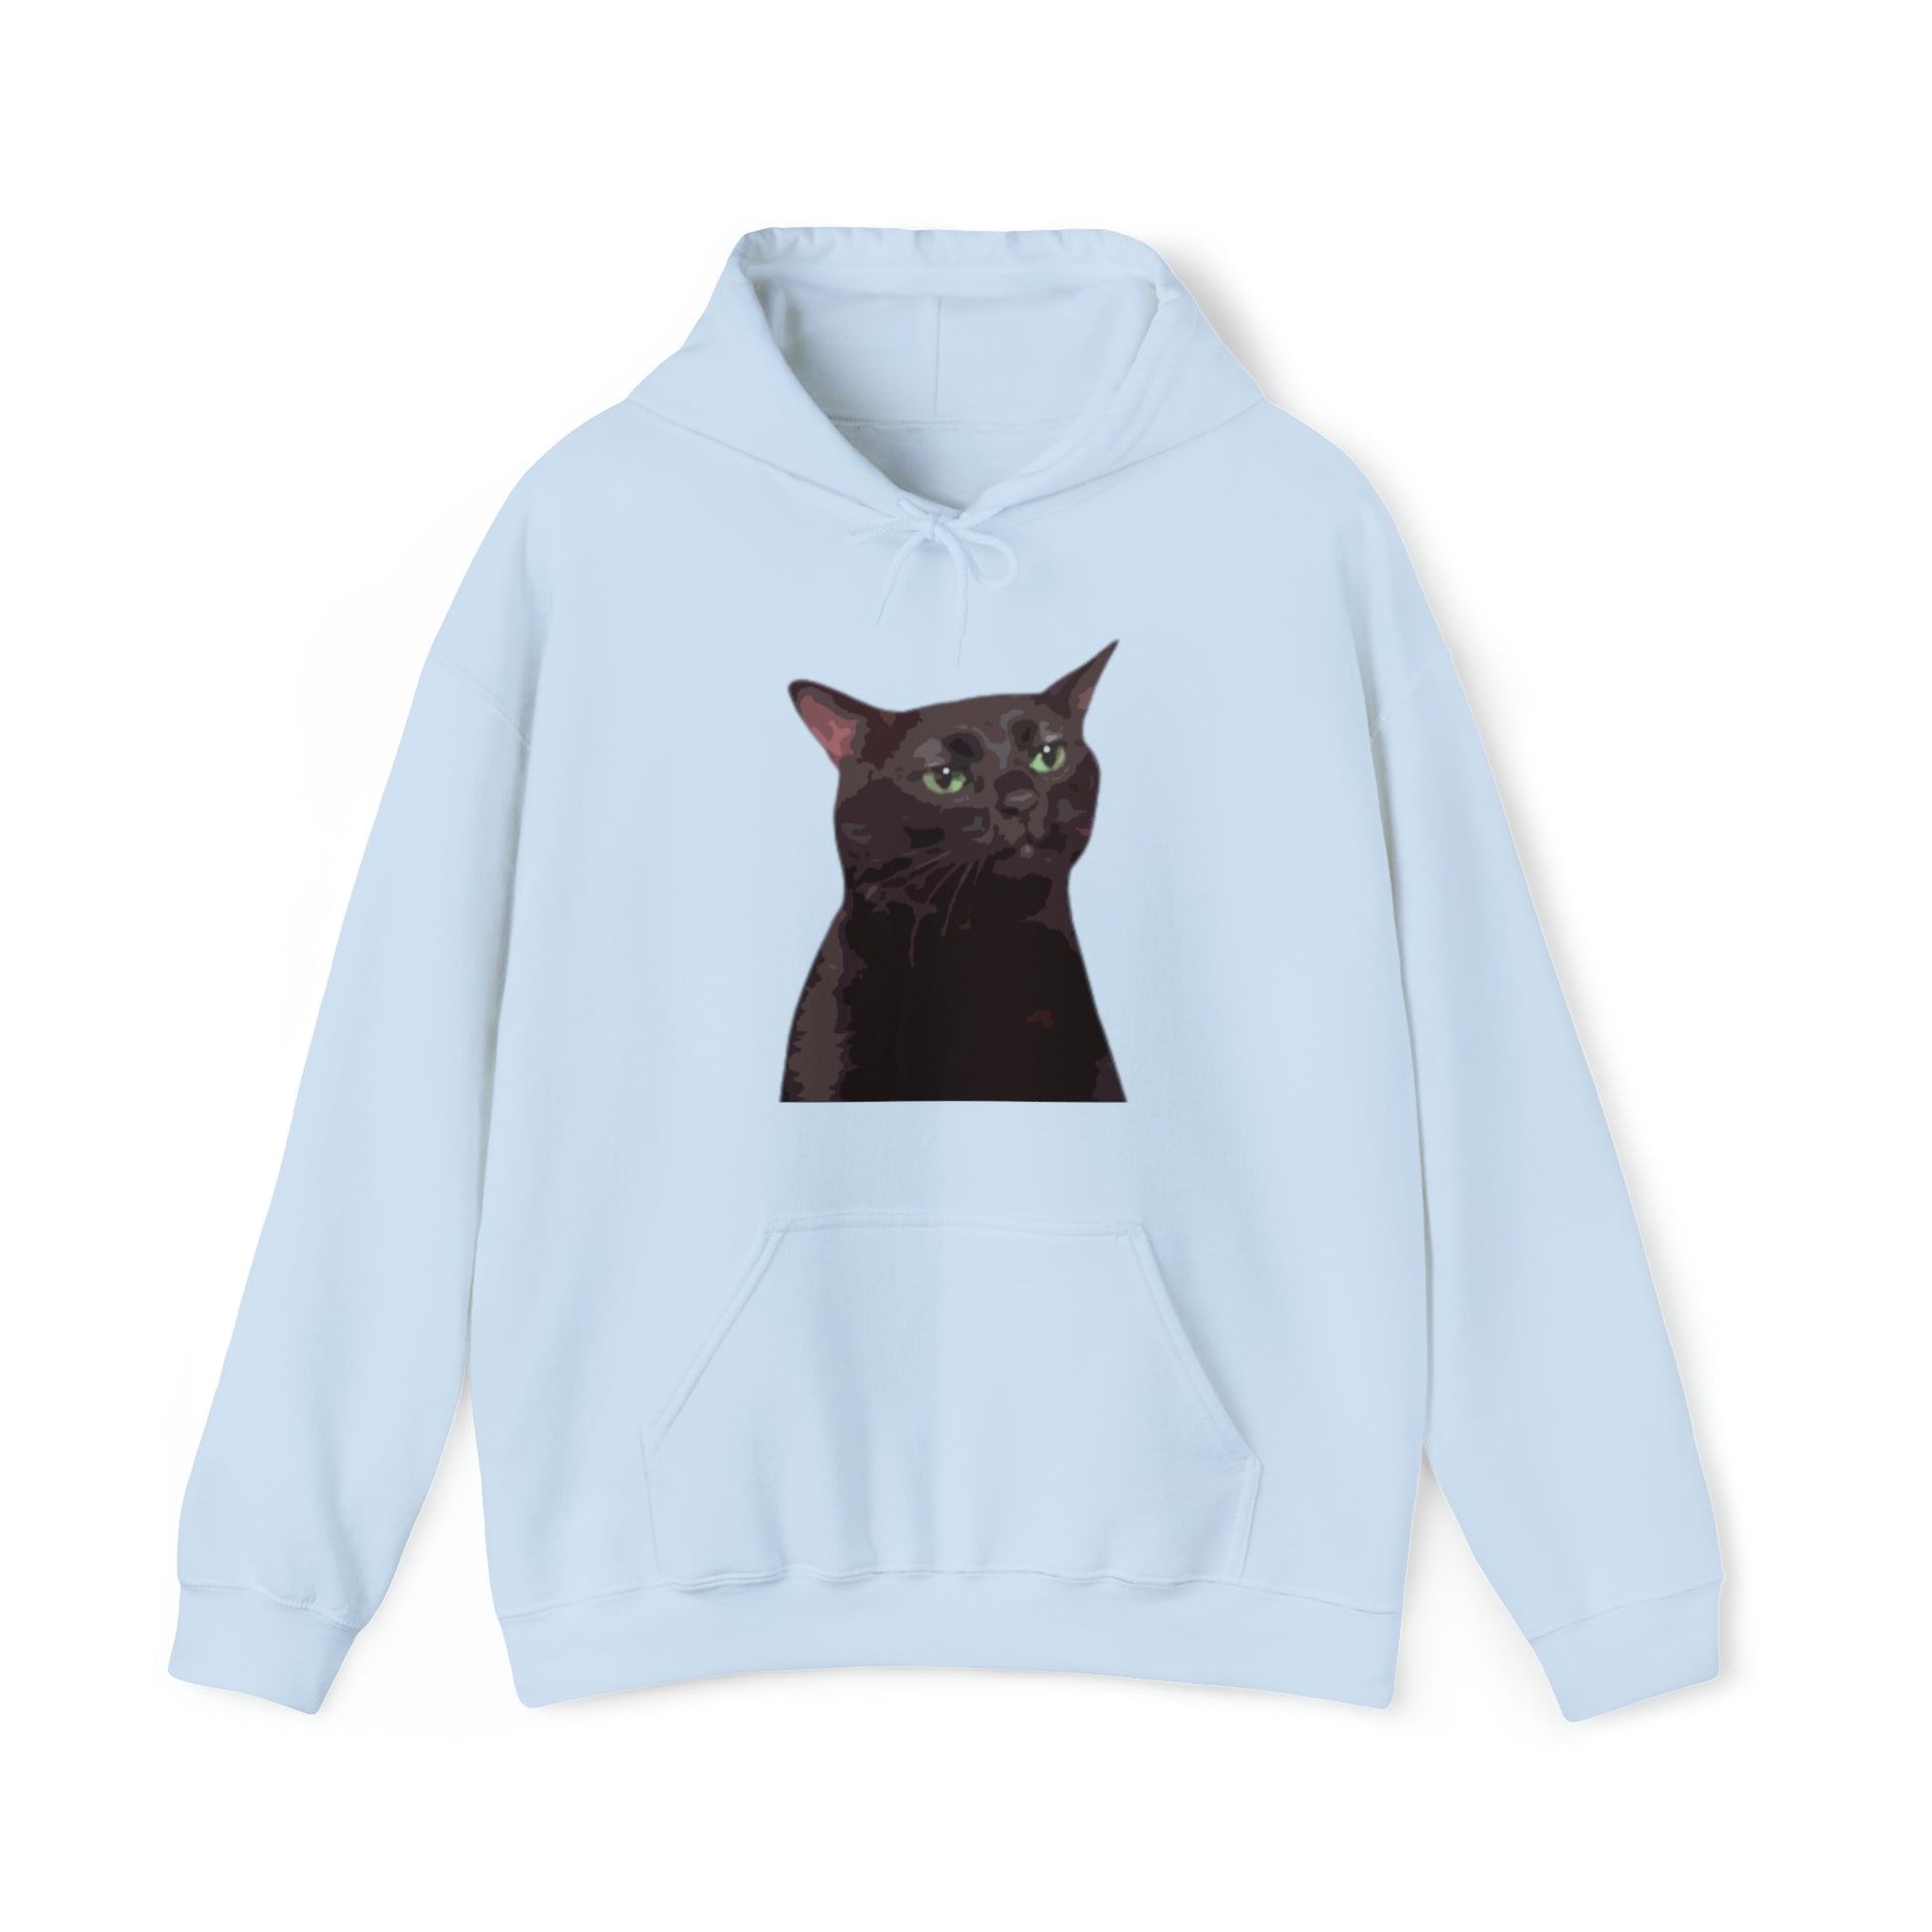 S Light Blue Black Cat Zoning Out Hoodie from HoodySZN.com